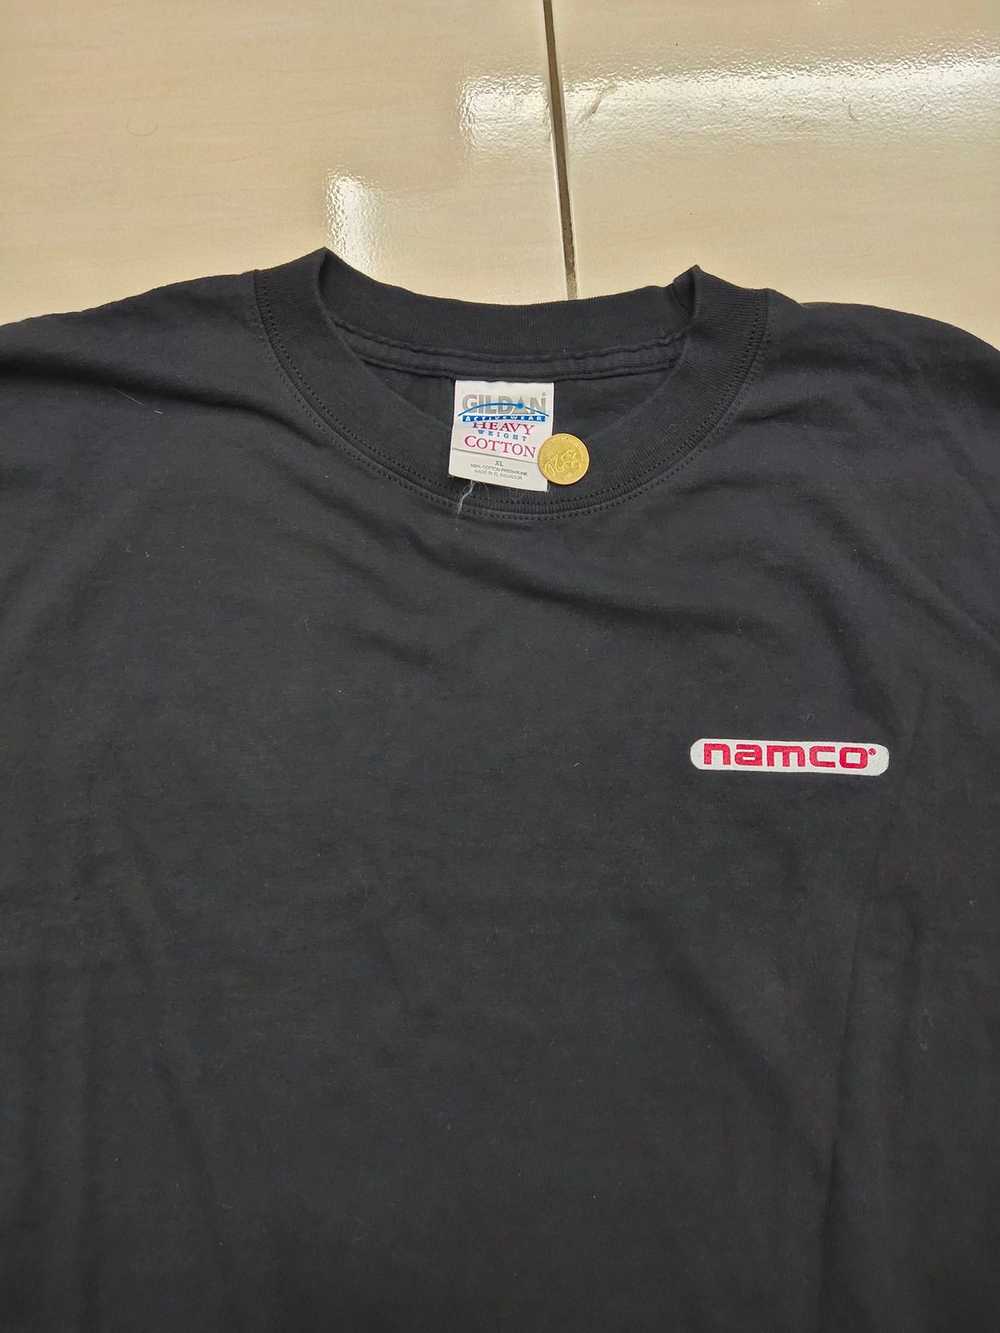 Vintage Vintage Namco Dead To Right T-Shirt - image 1